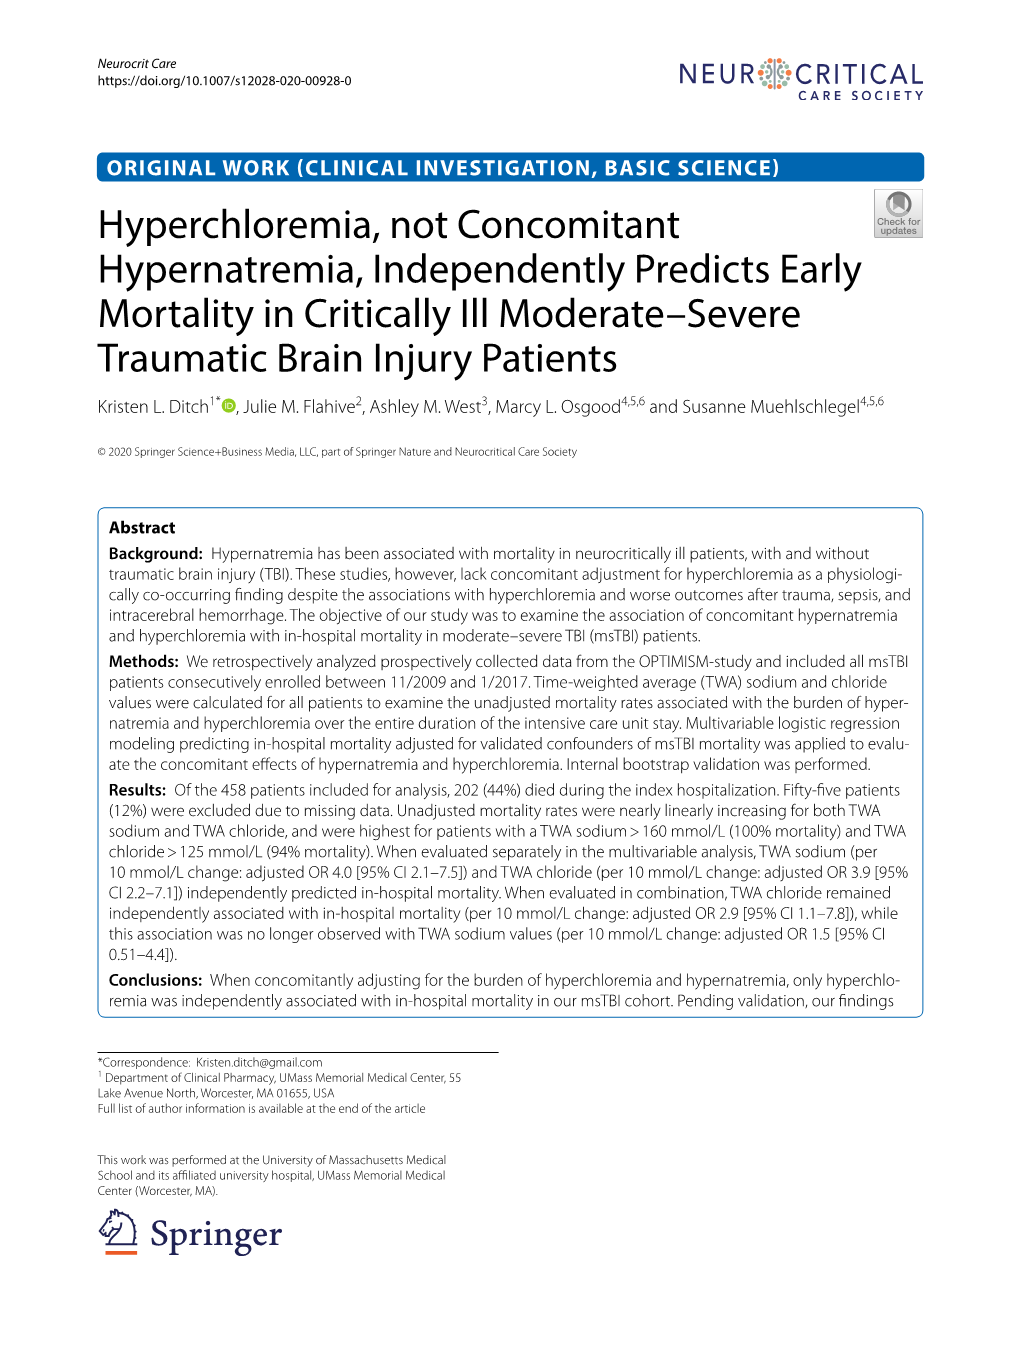 Hyperchloremia, Not Concomitant Hypernatremia, Independently Predicts Early Mortality in Critically Ill Moderate–Severe Traumatic Brain Injury Patients Kristen L